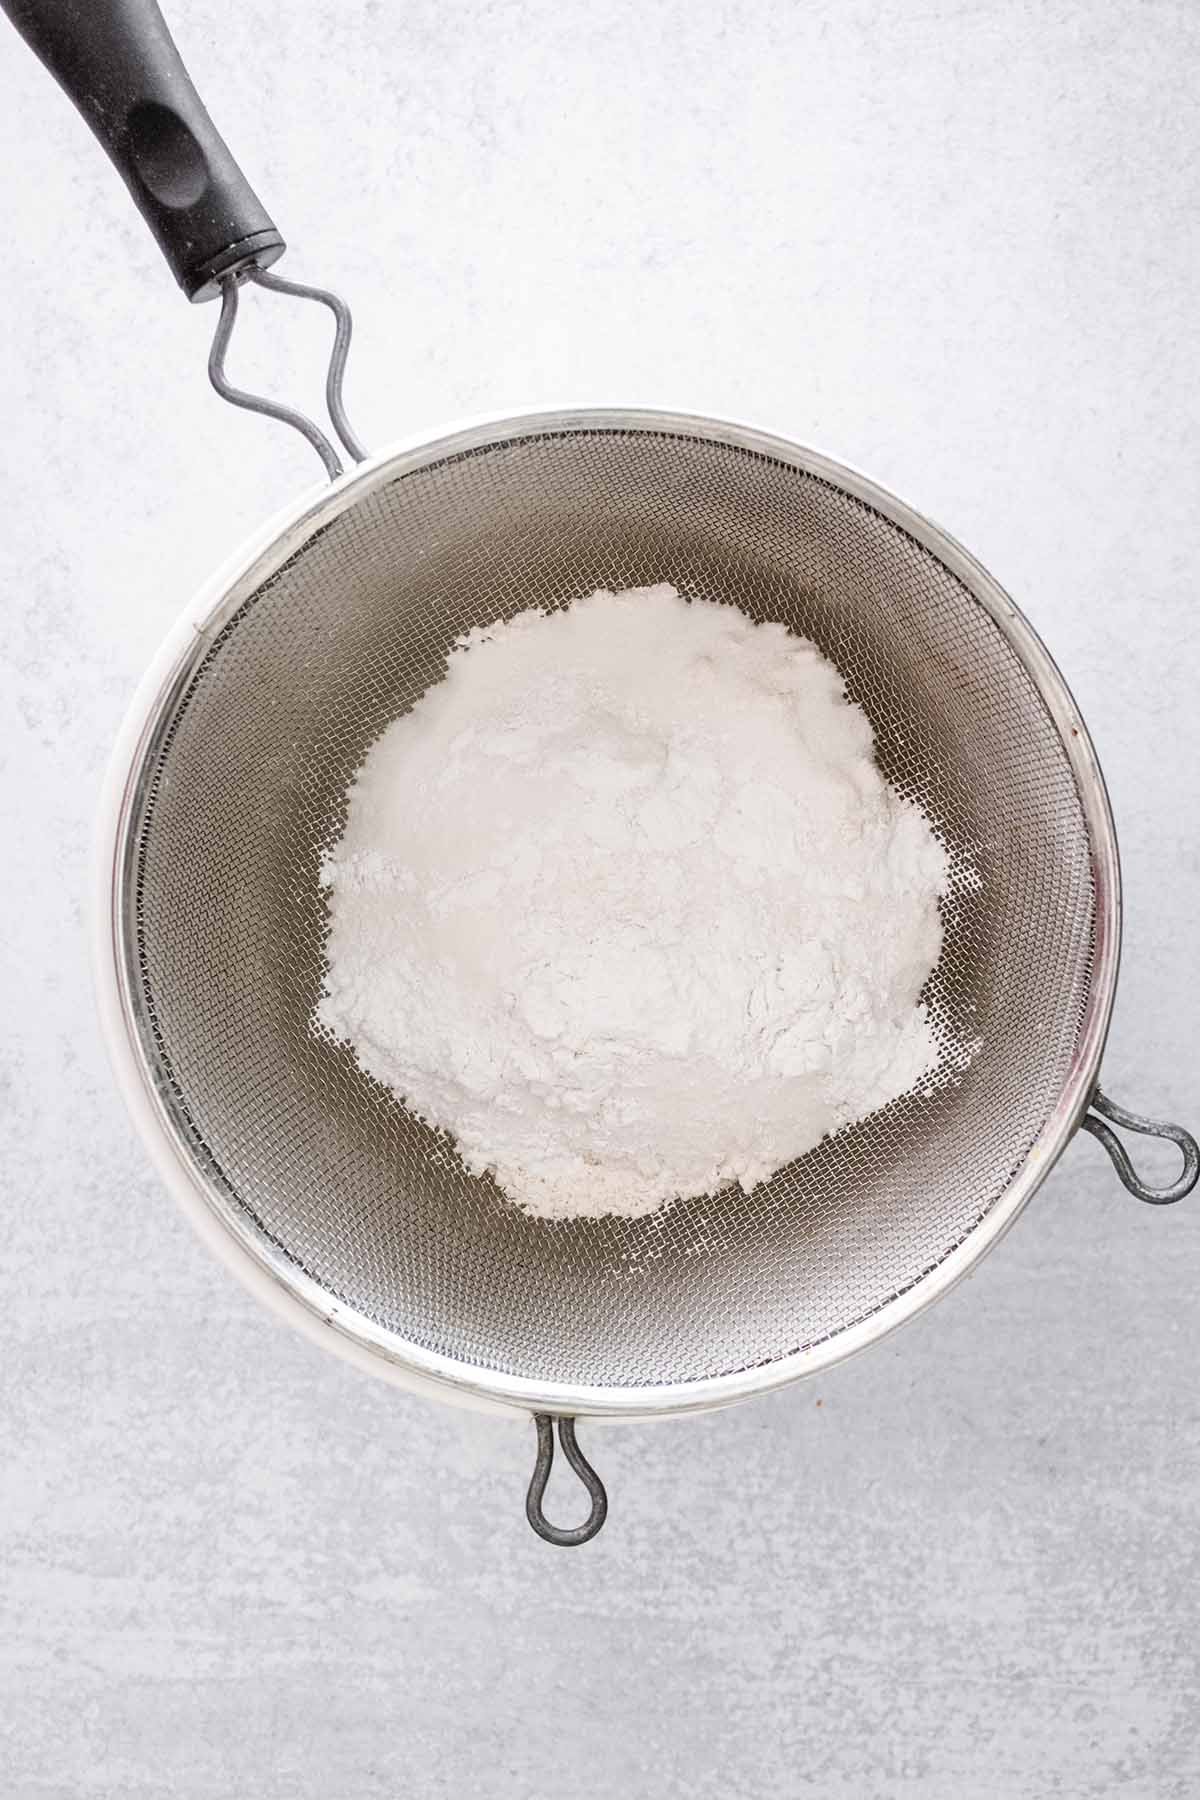 Dry ingredients in a fine mesh strainer over a white ceramic bowl